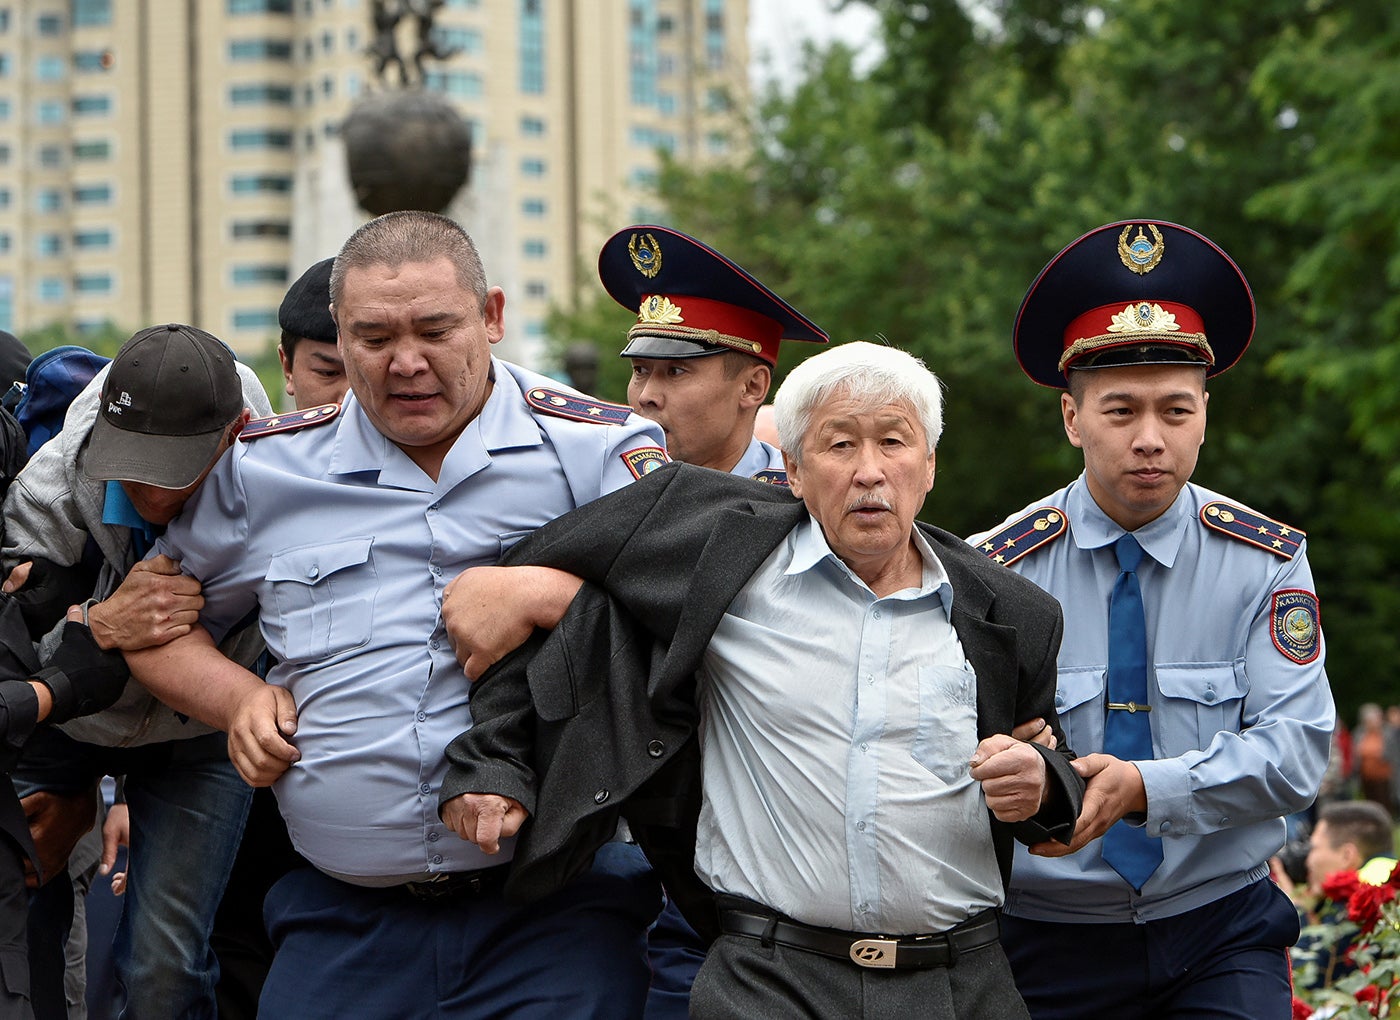 Police officers detain an opposition supporter during a protest around presidential elections, in Almaty, Kazakhstan, June 9, 2019.